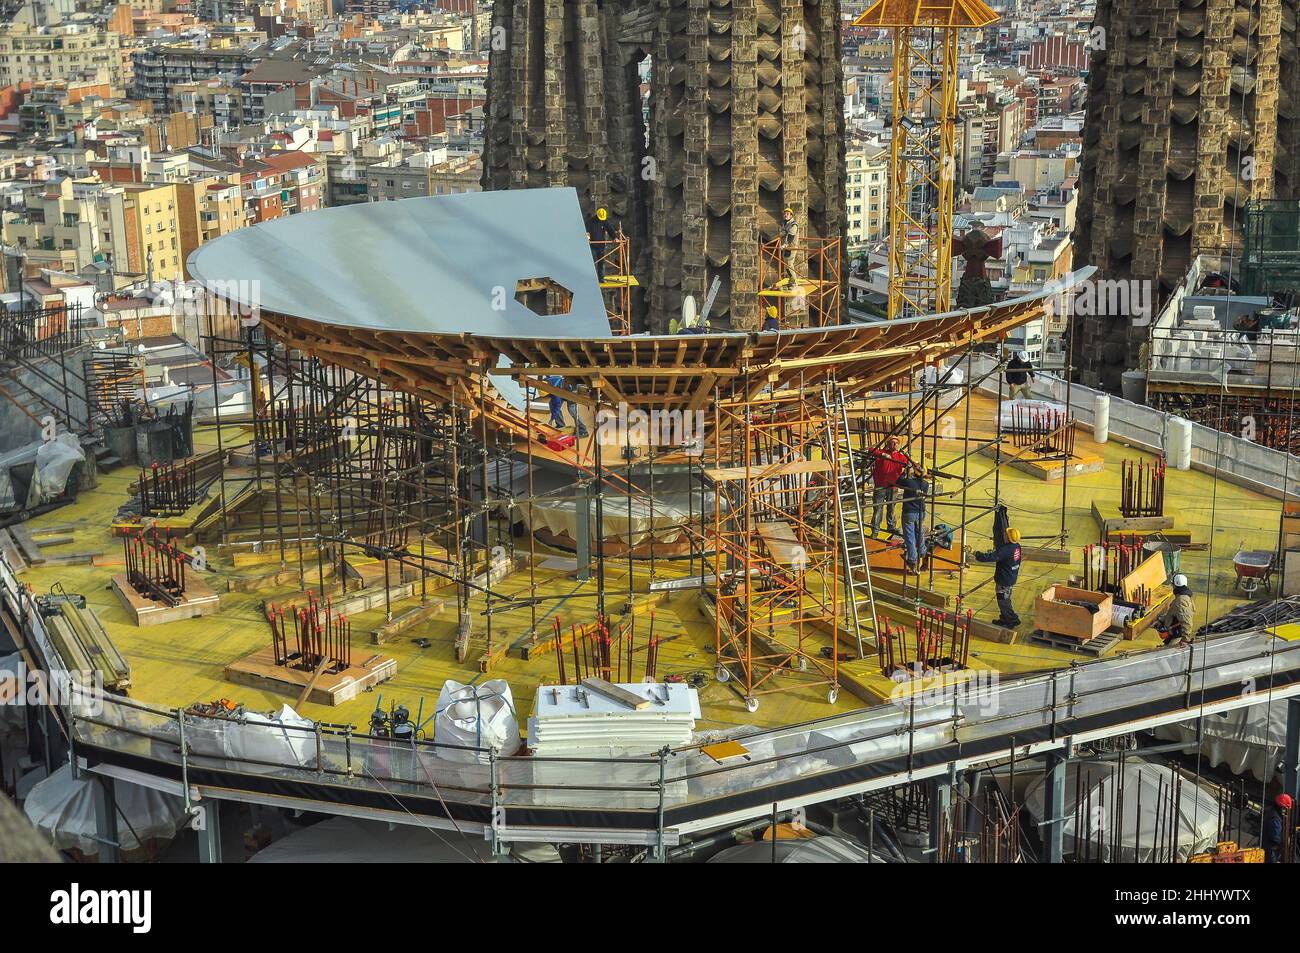 Construction works of the Crossing room, at the base of the Jesus Christ tower of the Sagrada Familia basilica (Barcelona, Catalonia, Spain) Stock Photo